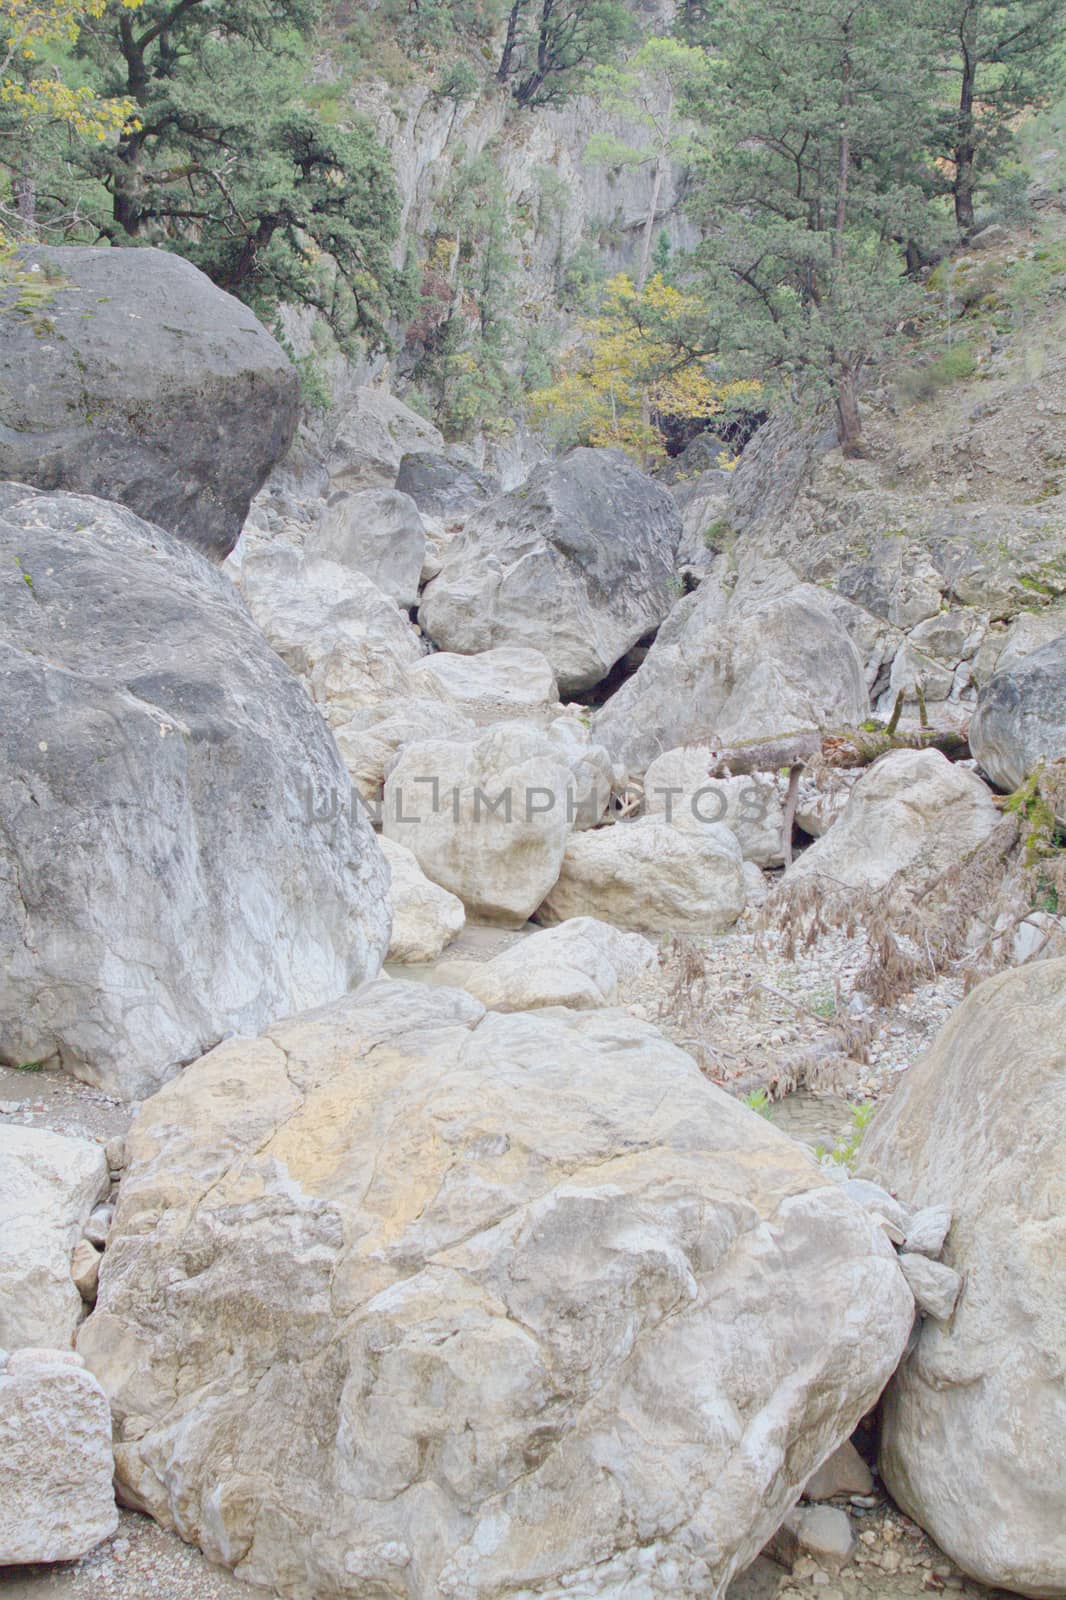 Dry Creek flows between large stones. Visible yellow forest. 